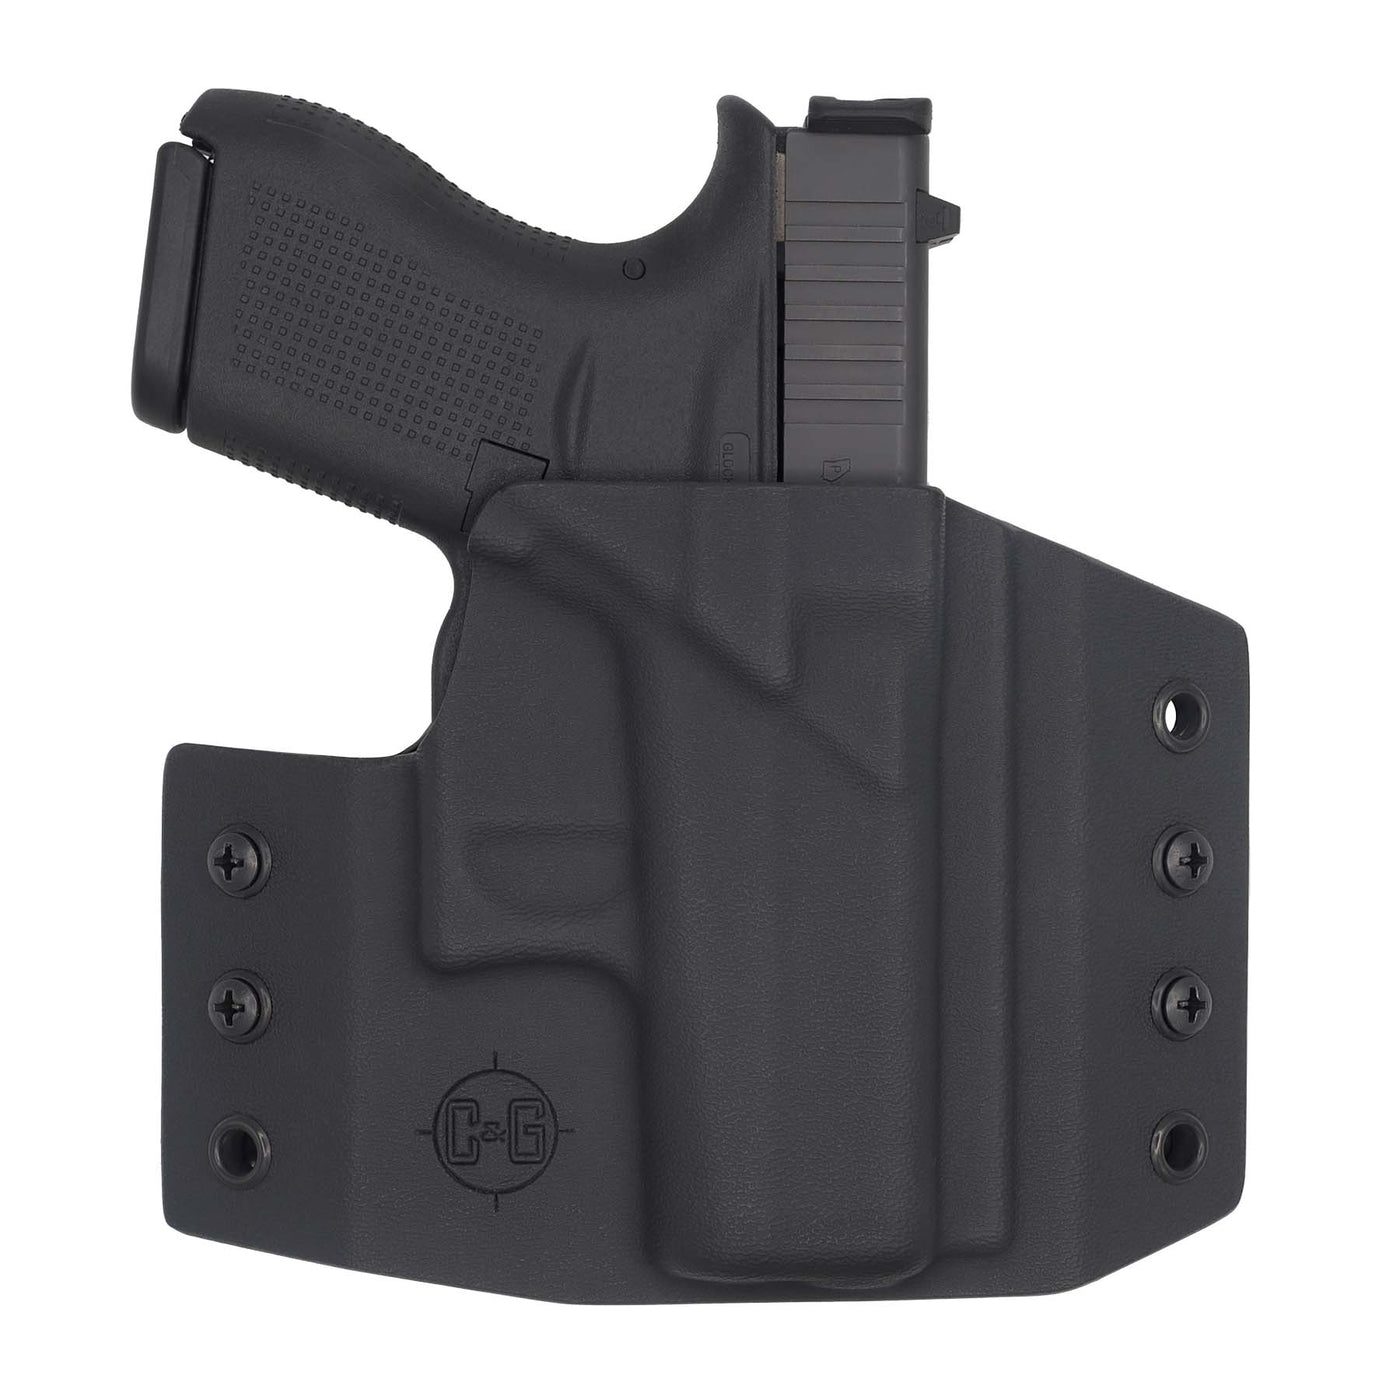 This is the custom C&G Holsters OWB Outside the waistband Holster for the Glock 42 holstered